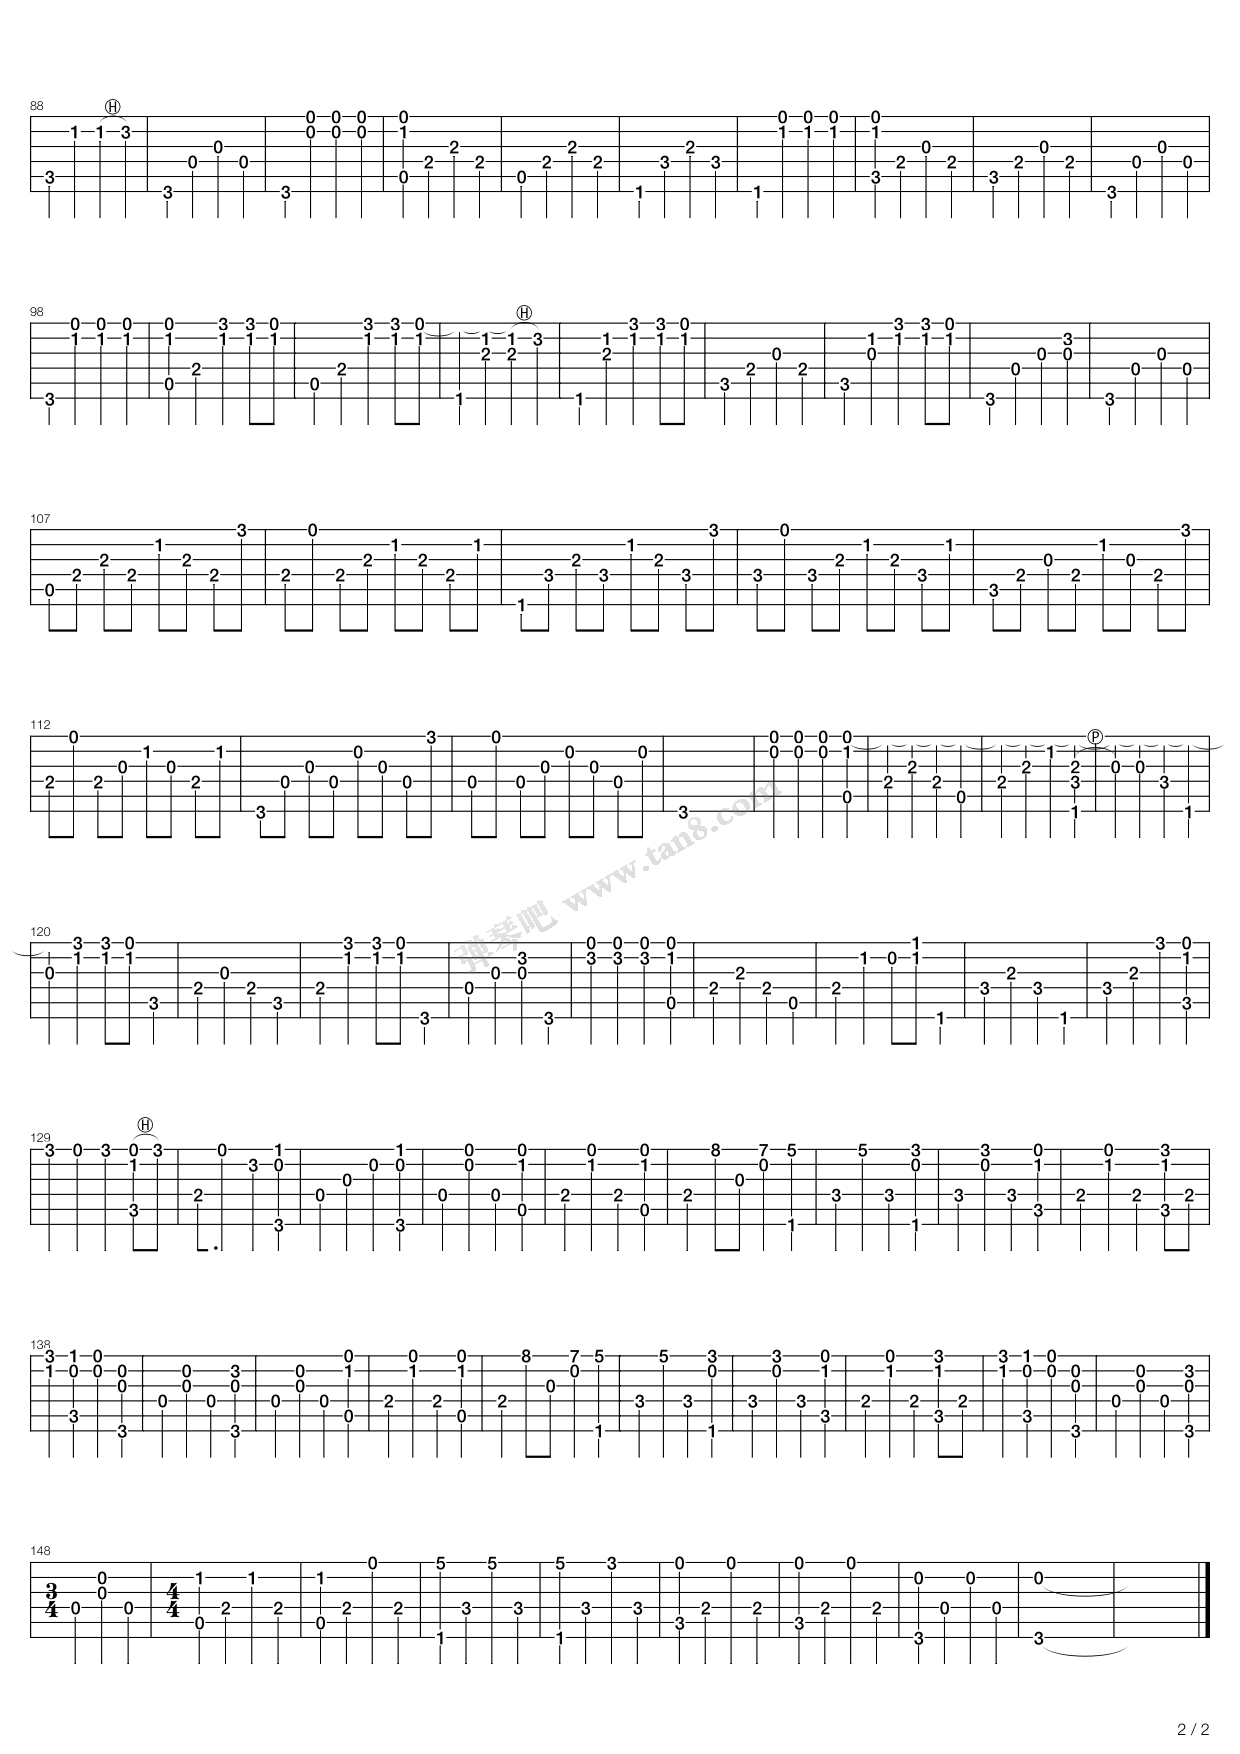 Faded By Alan Walker Solo Guitar Tabs Chords Sheet Music Free Learnguitarsonline Com